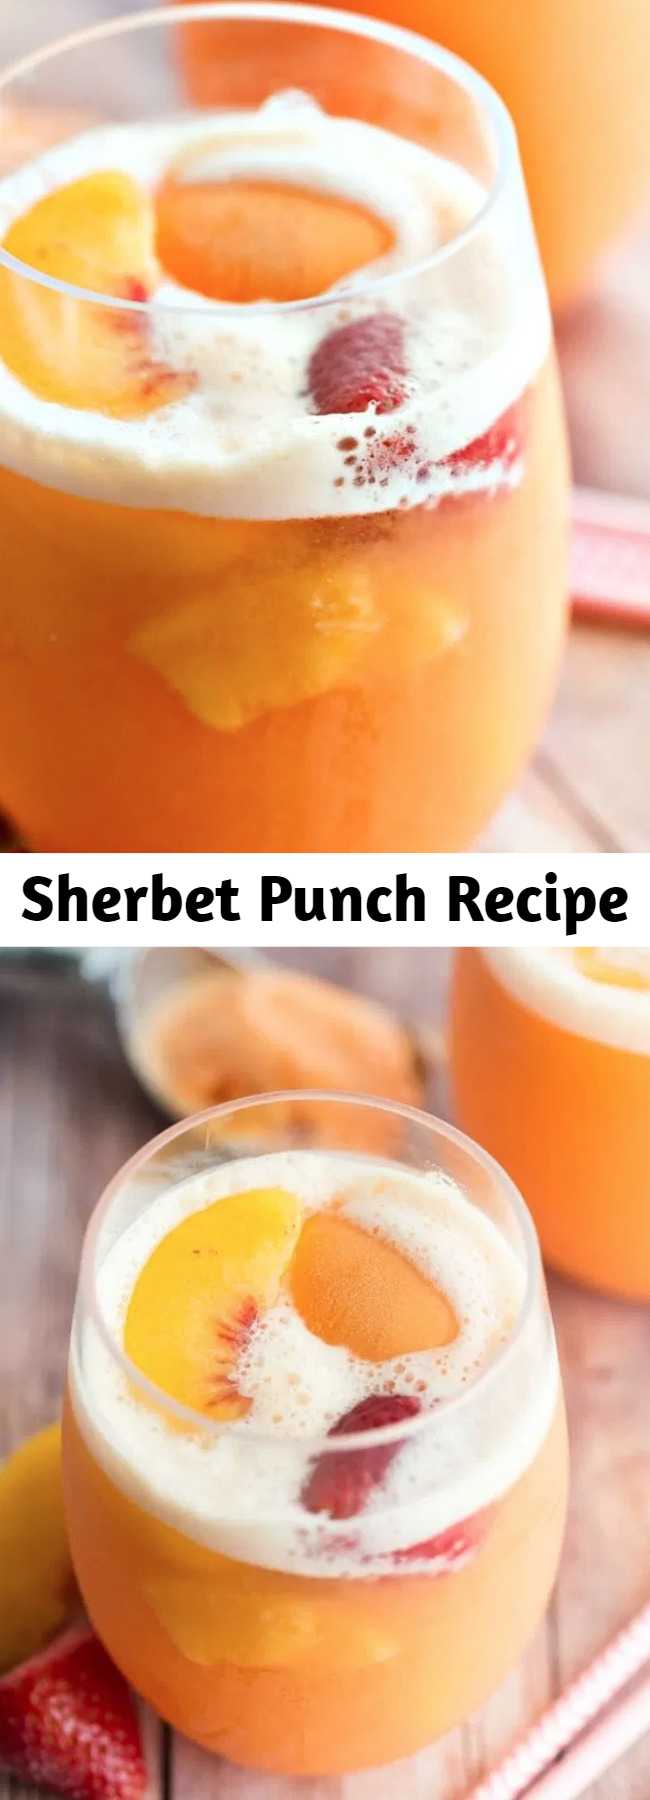 Sherbet Punch Recipe - Sherbet punch made with ginger ale, white grape juice, peaches, and strawberries is the best punch recipe ever! Perfect party punch for your next baby shower, wedding shower, summer party, or random Tuesday afternoon!